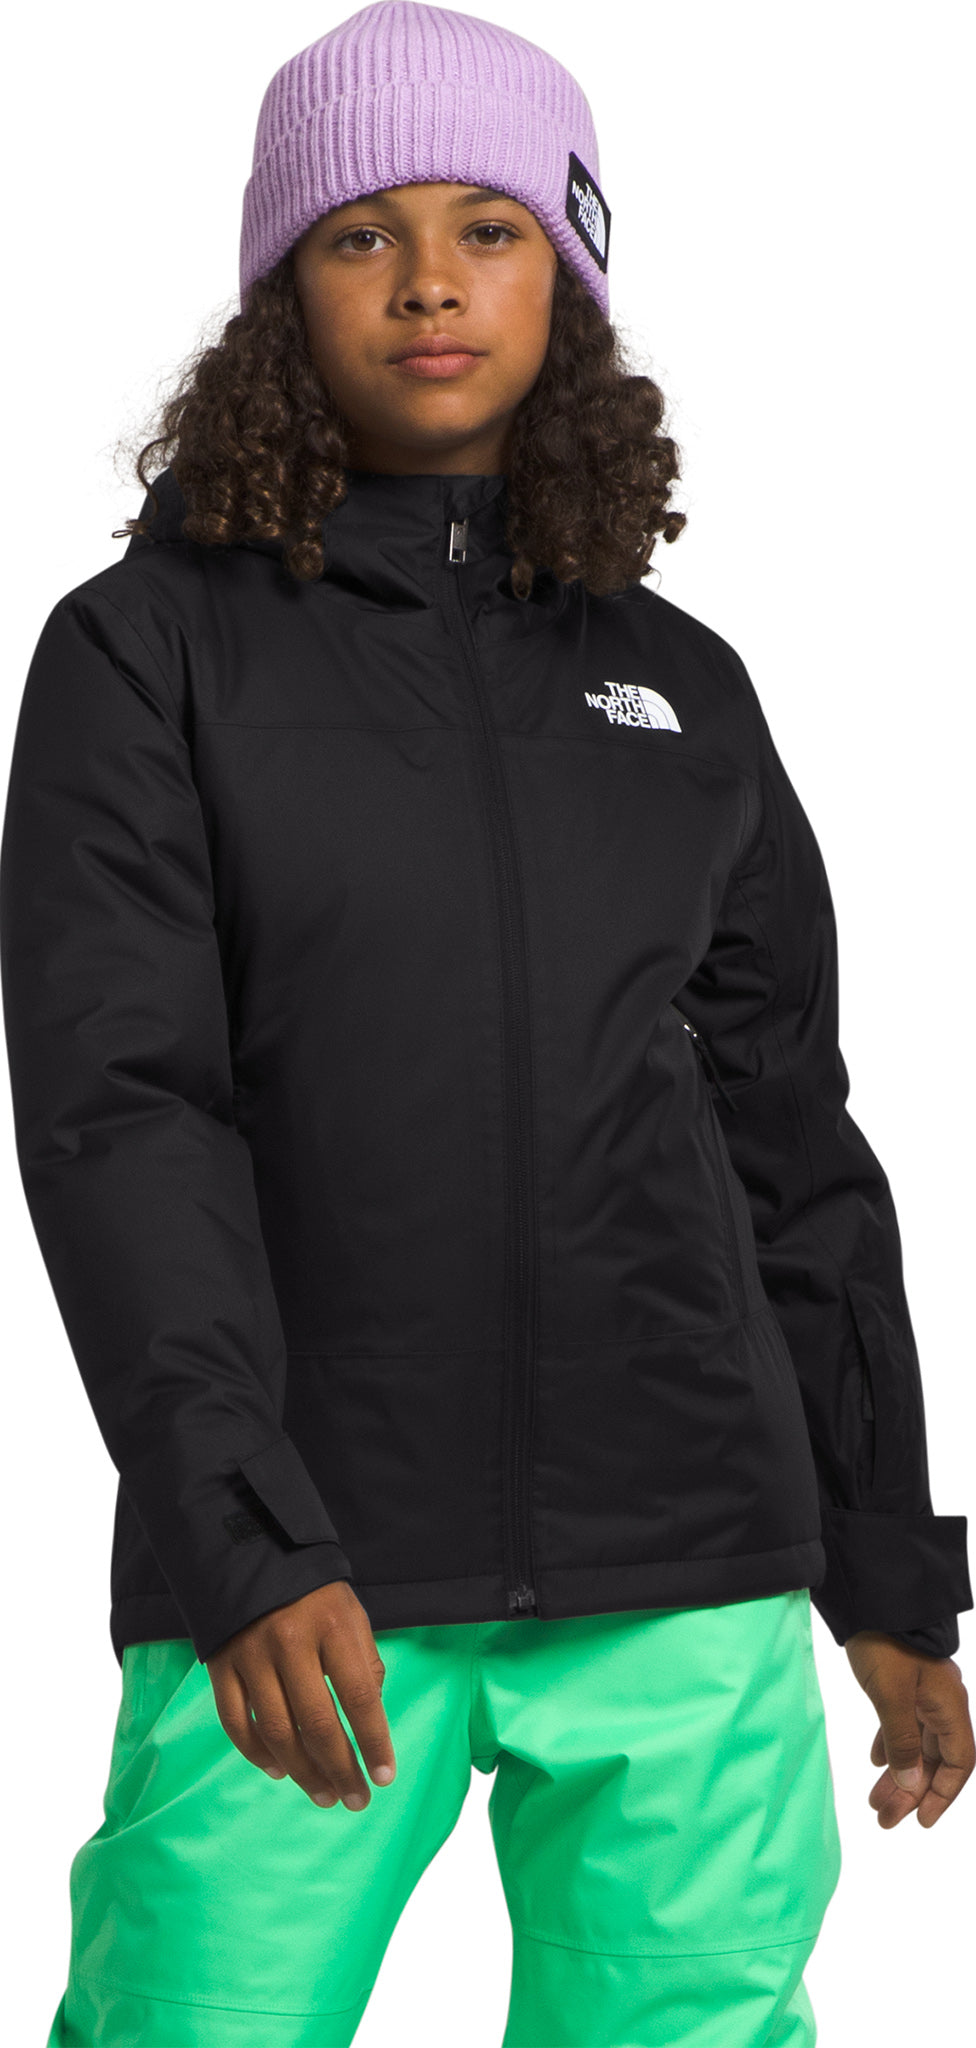 The North Face girls youth XL Black Hyvent Down Fill Waterproof